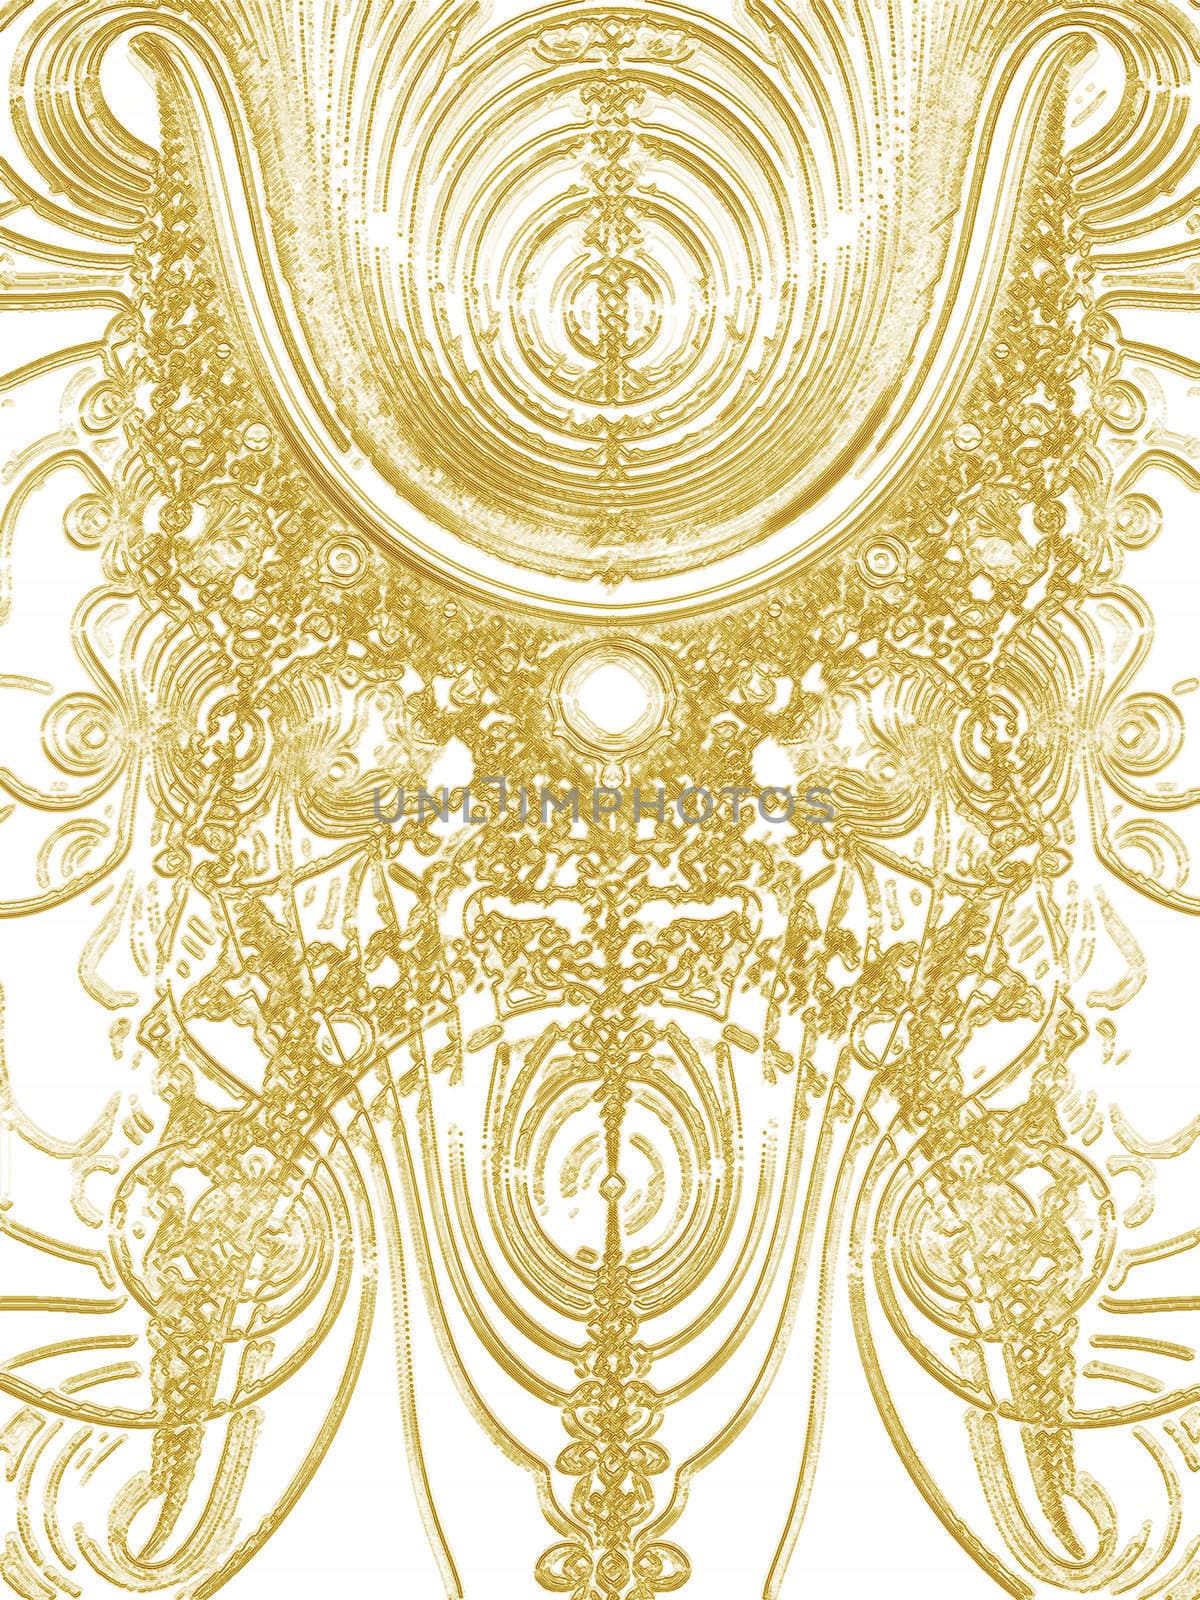 Gold Plated Science Fiction Style Fractal by bobbigmac